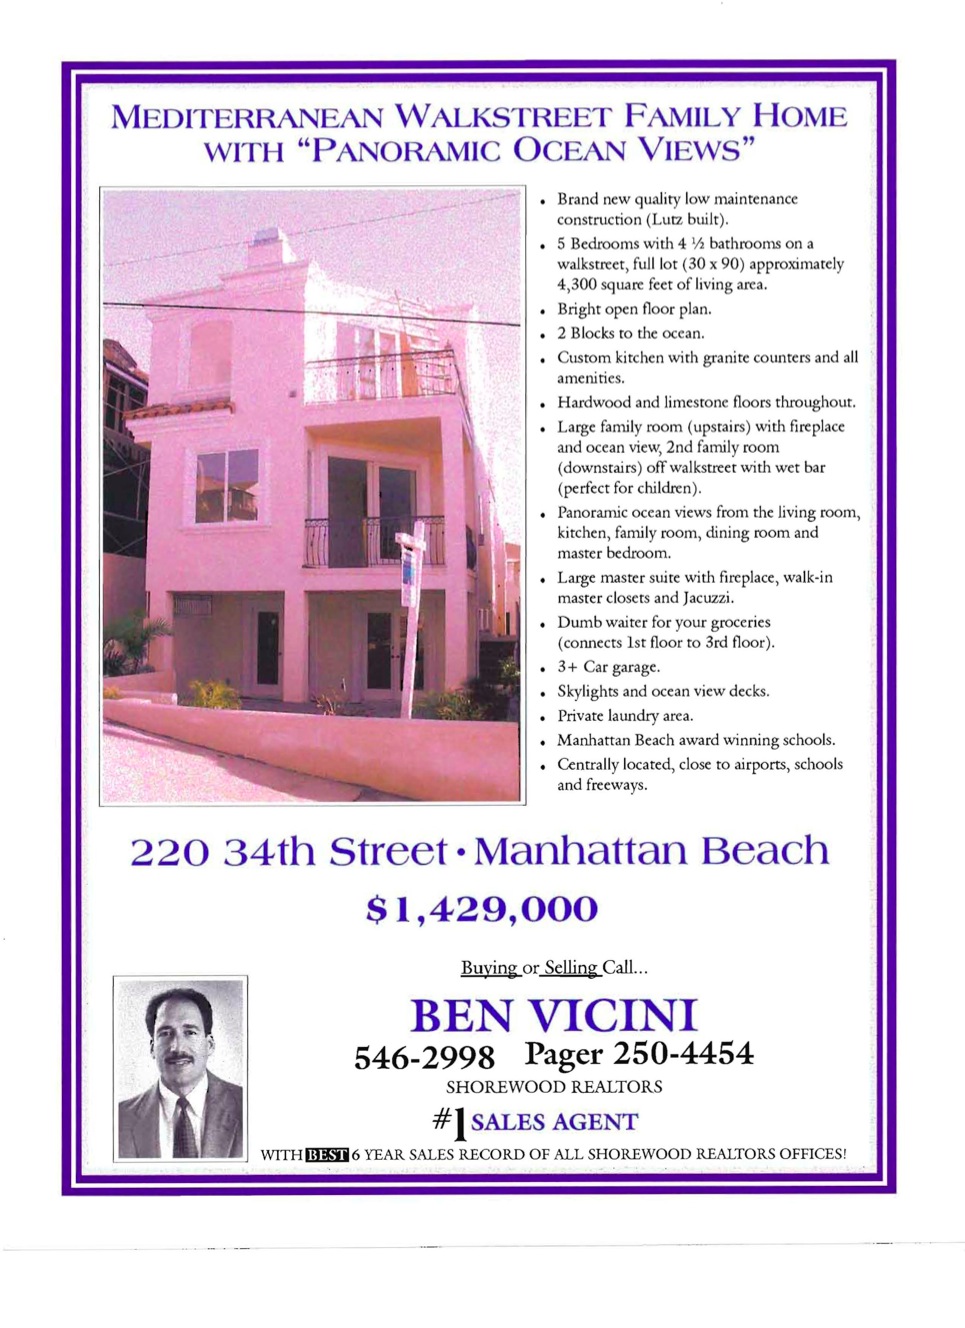 Vicini's Past Listings & Sales_Page_34